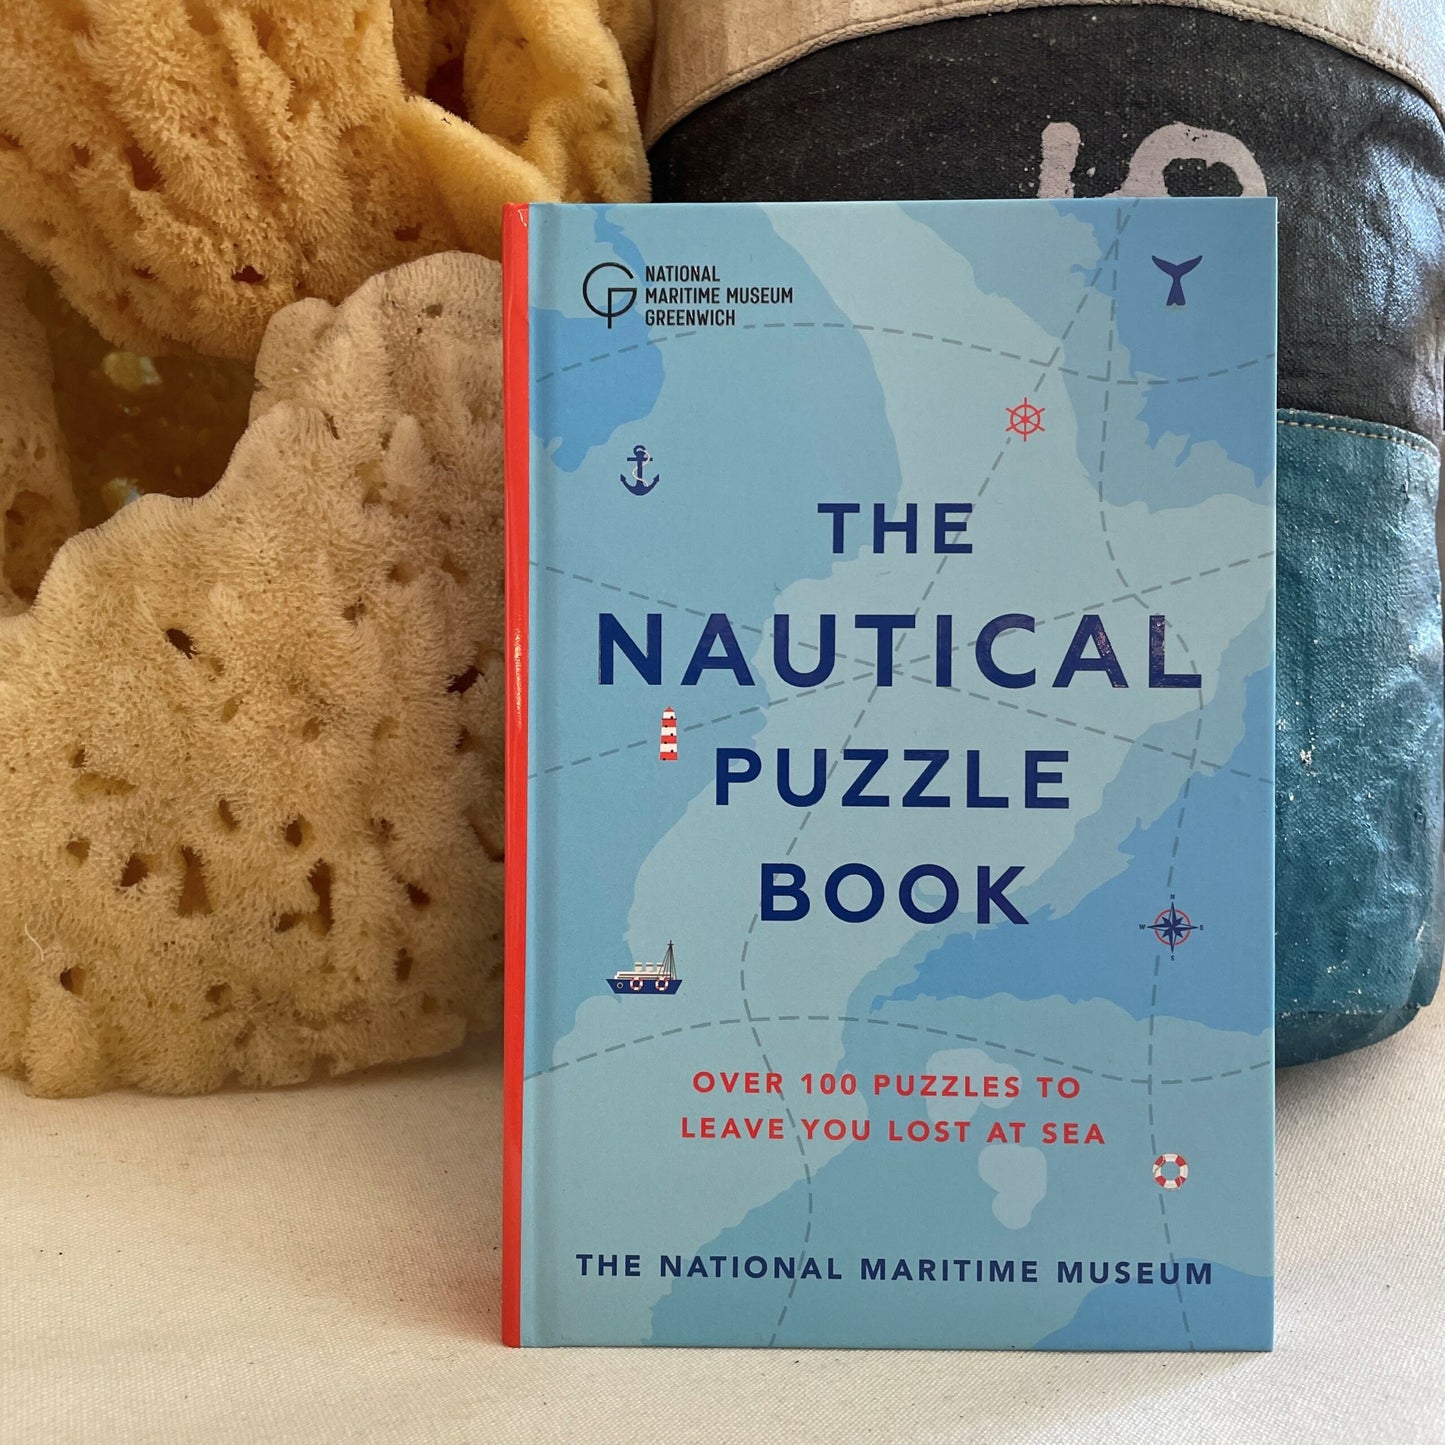 The Nautical Puzzle Book